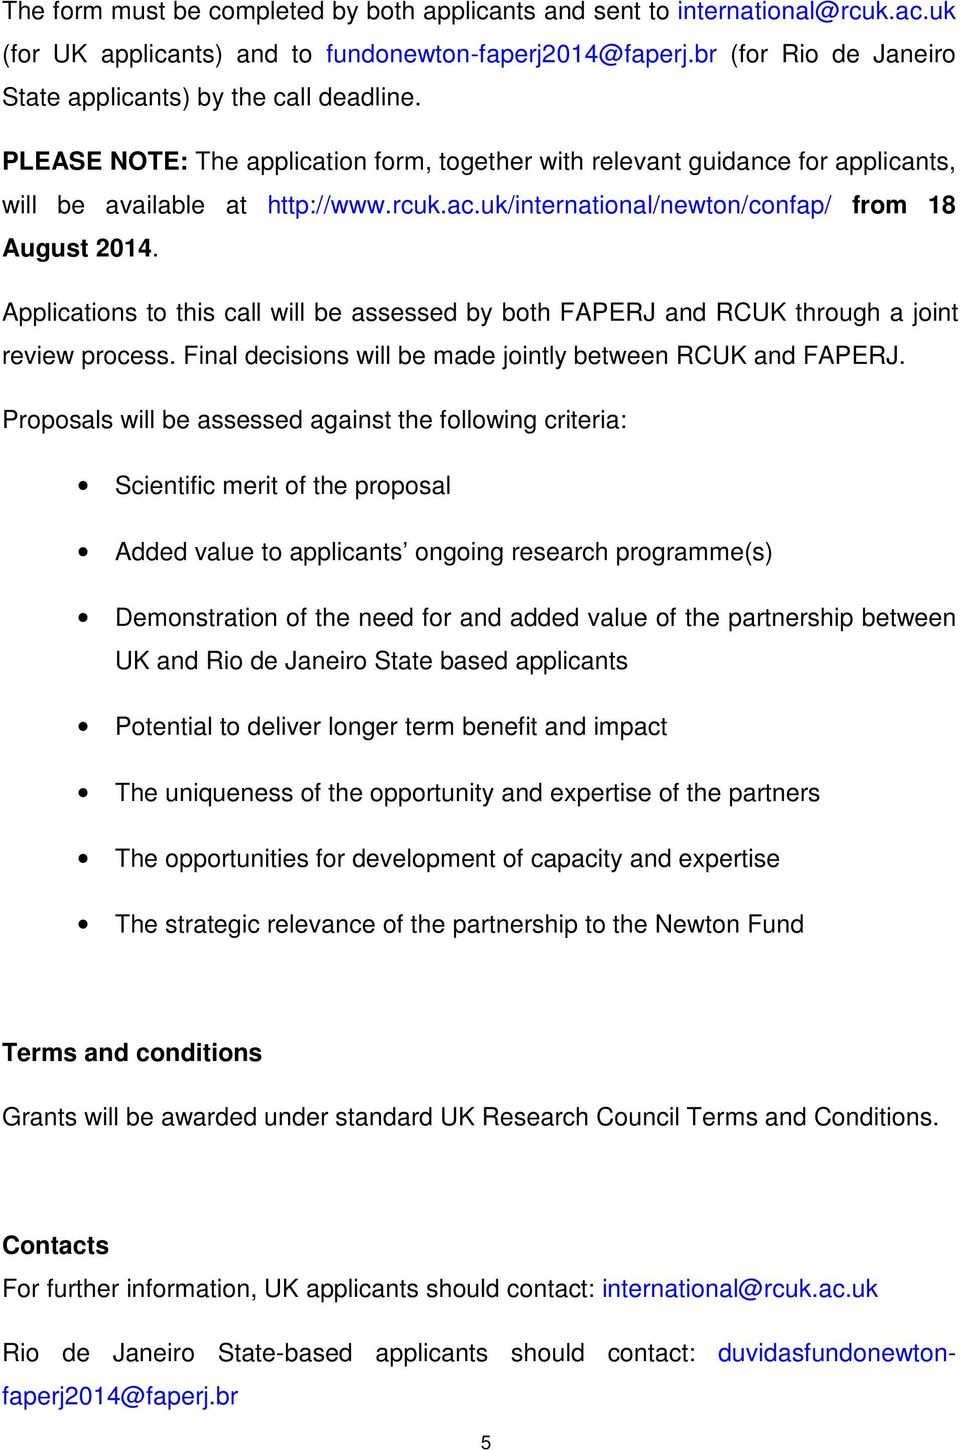 uk/international/newton/confap/ from 18 August 2014. Applications to this call will be assessed by both FAPERJ and RCUK through a joint review process.